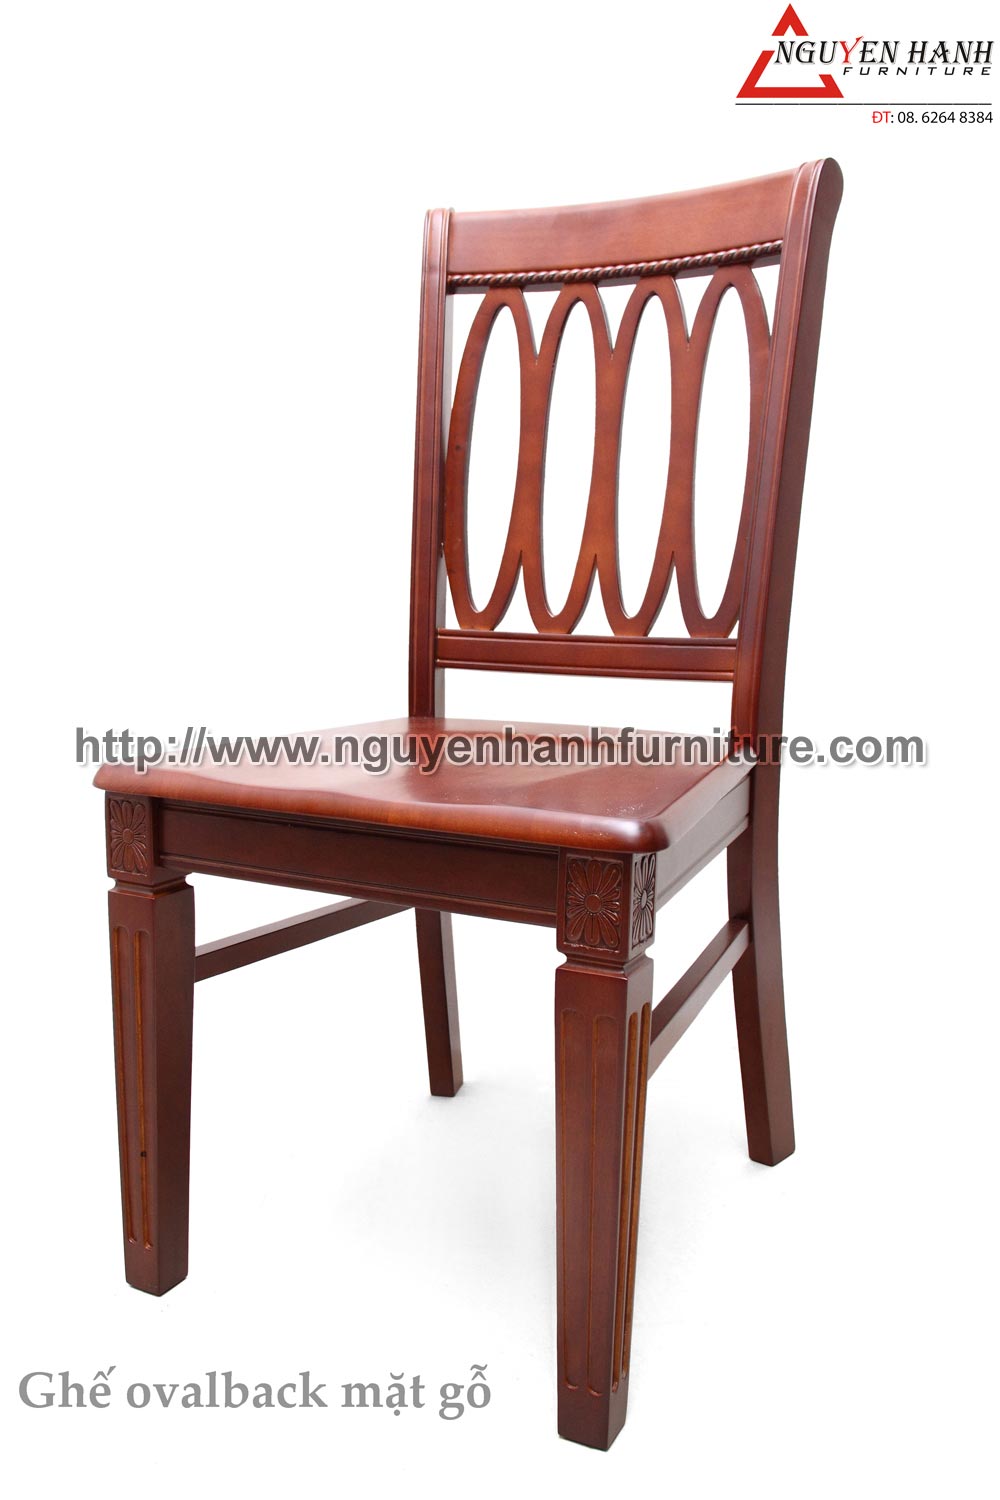 Name product: Ovalback chair with wooden surface- Dimensions:  - Description: Wood natural rubber